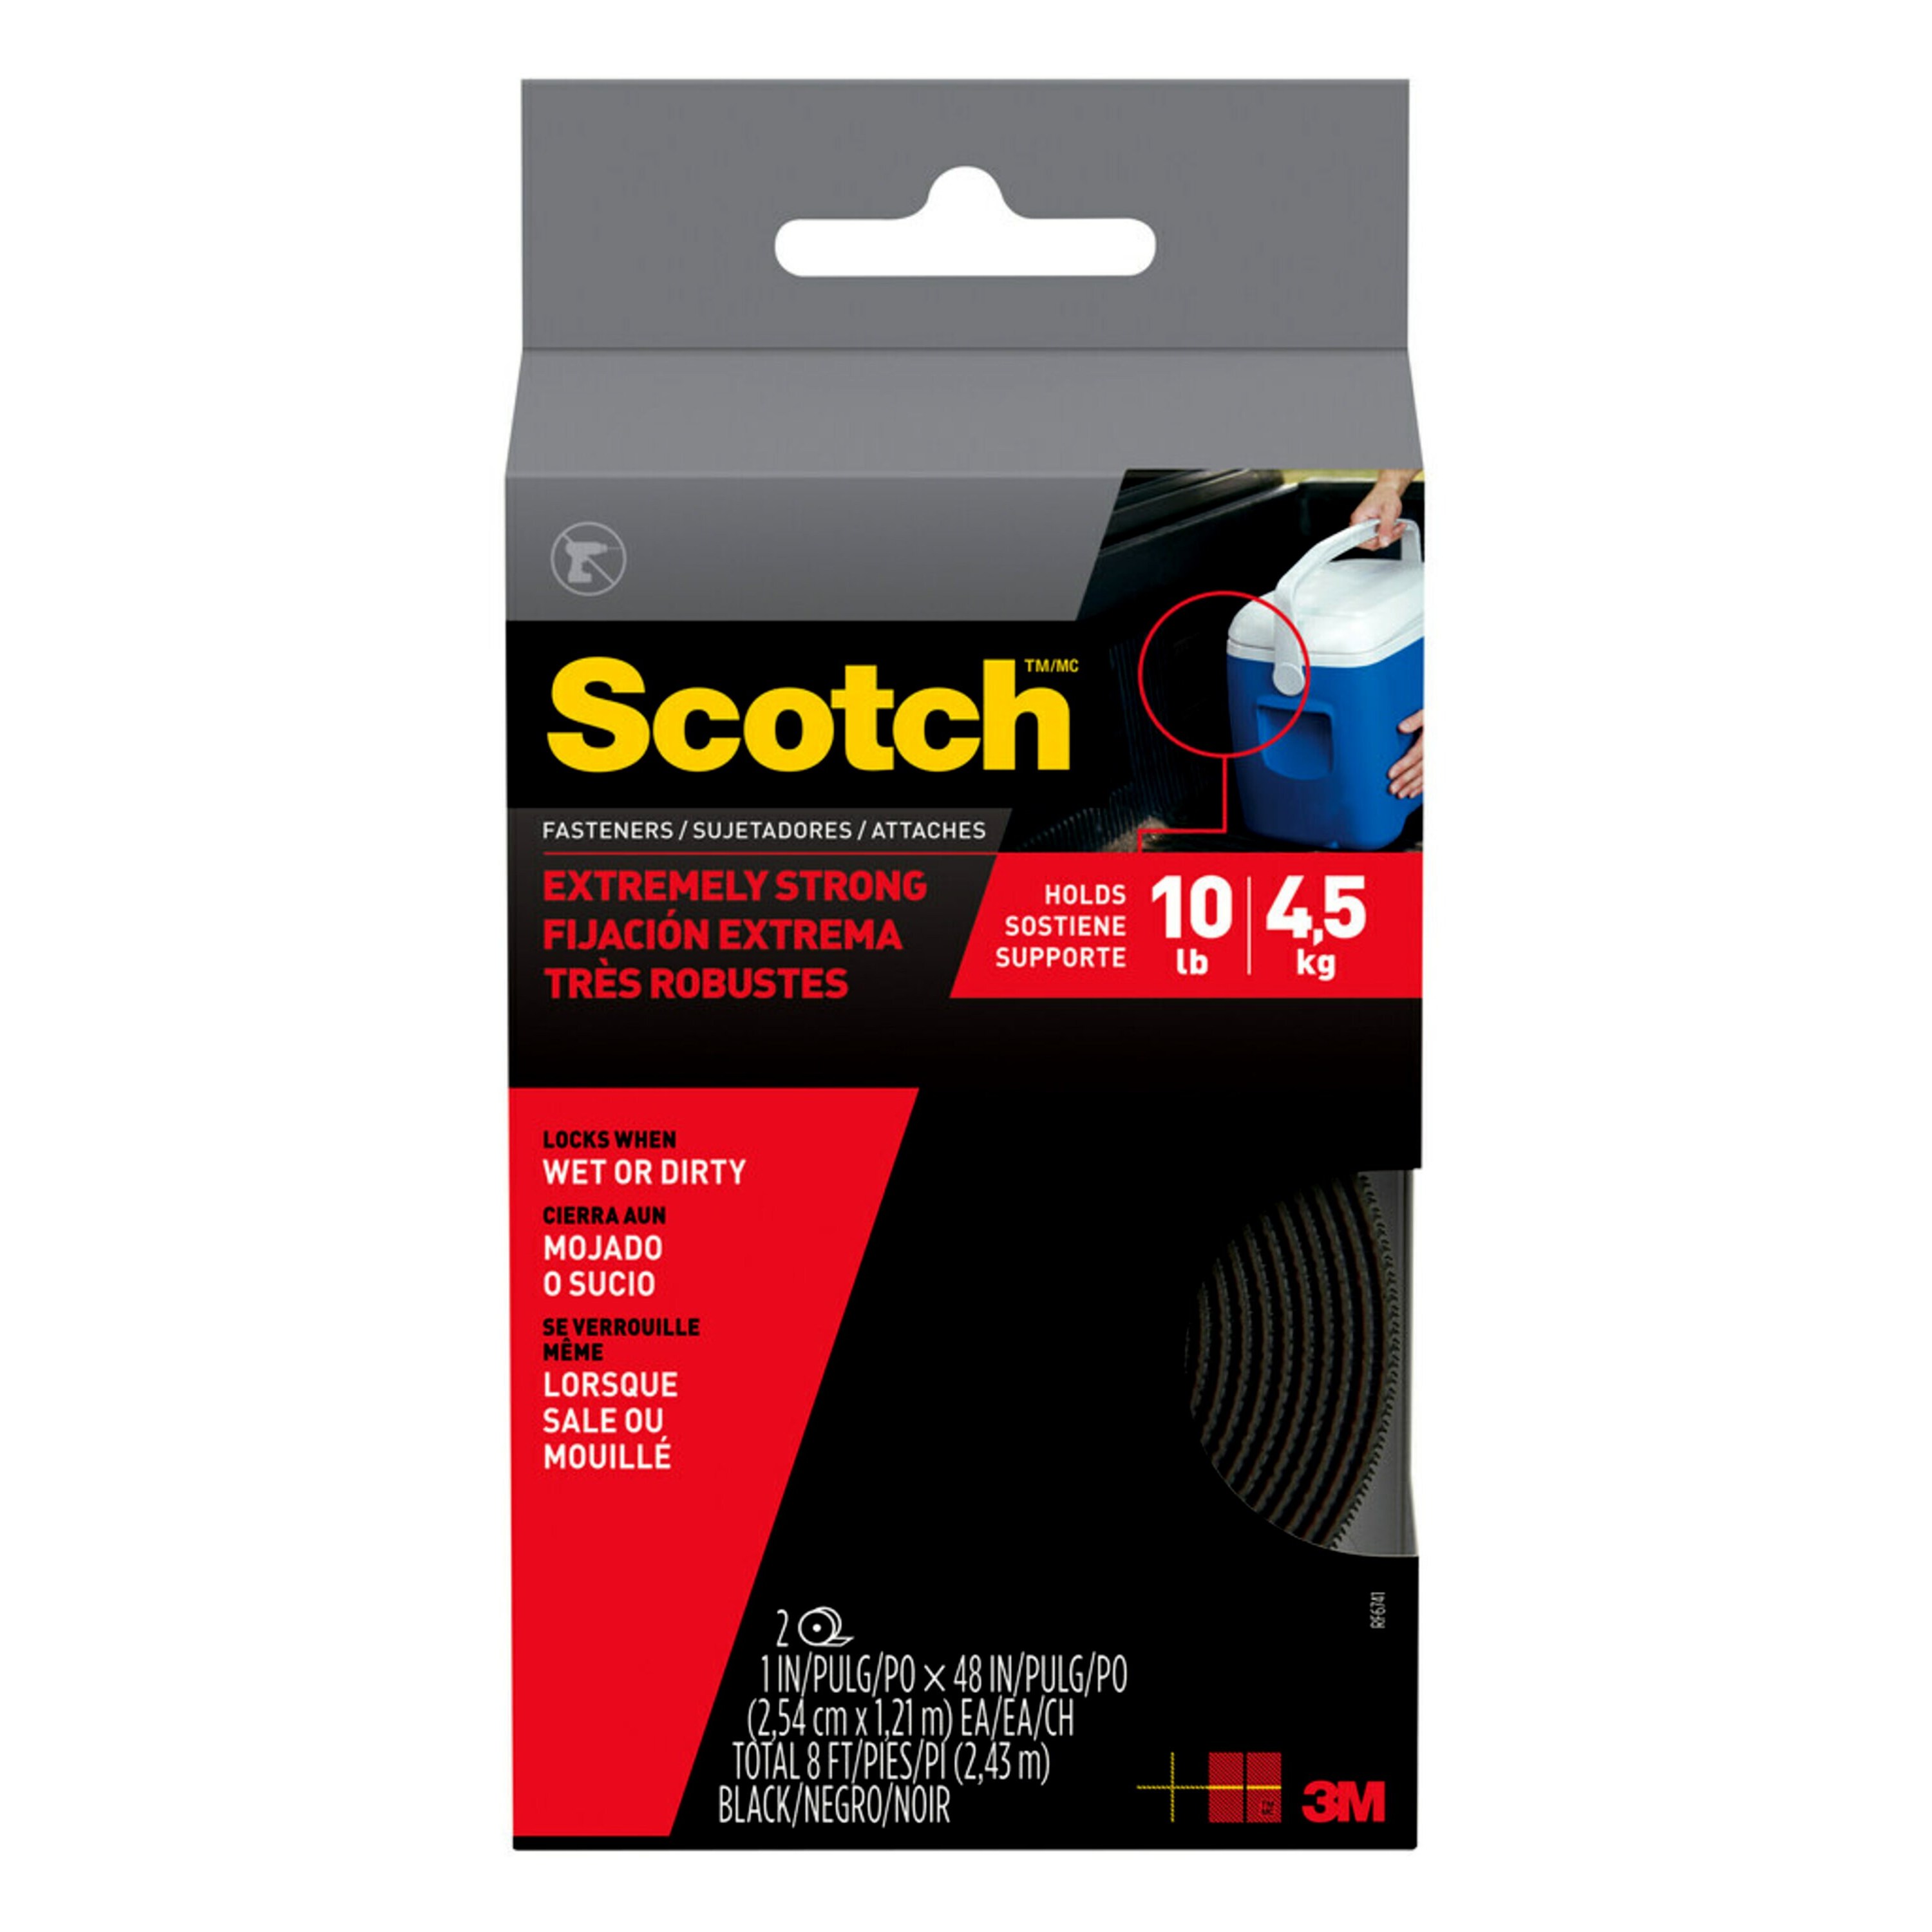 Scotch Mounting fastener 48-in Black Hook and Loop Fastener 10-lb-lb.  Weight Capacity (2-Pack) in the Specialty Fasteners & Fastener Kits  department at